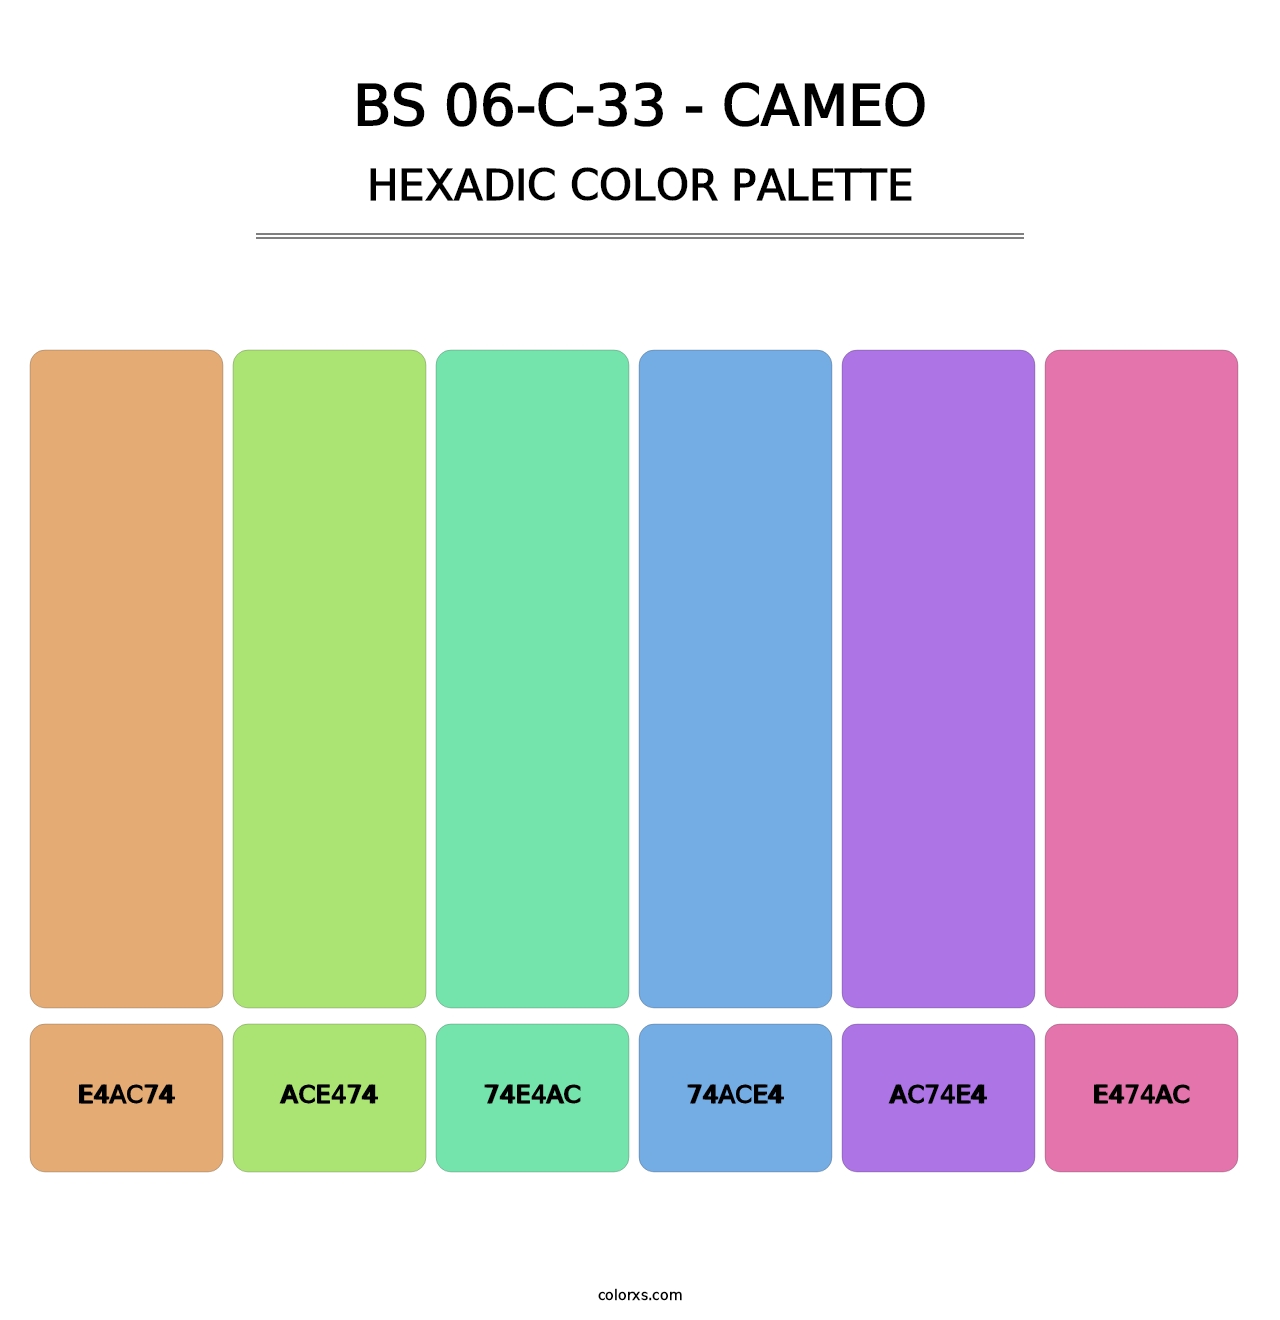 BS 06-C-33 - Cameo - Hexadic Color Palette